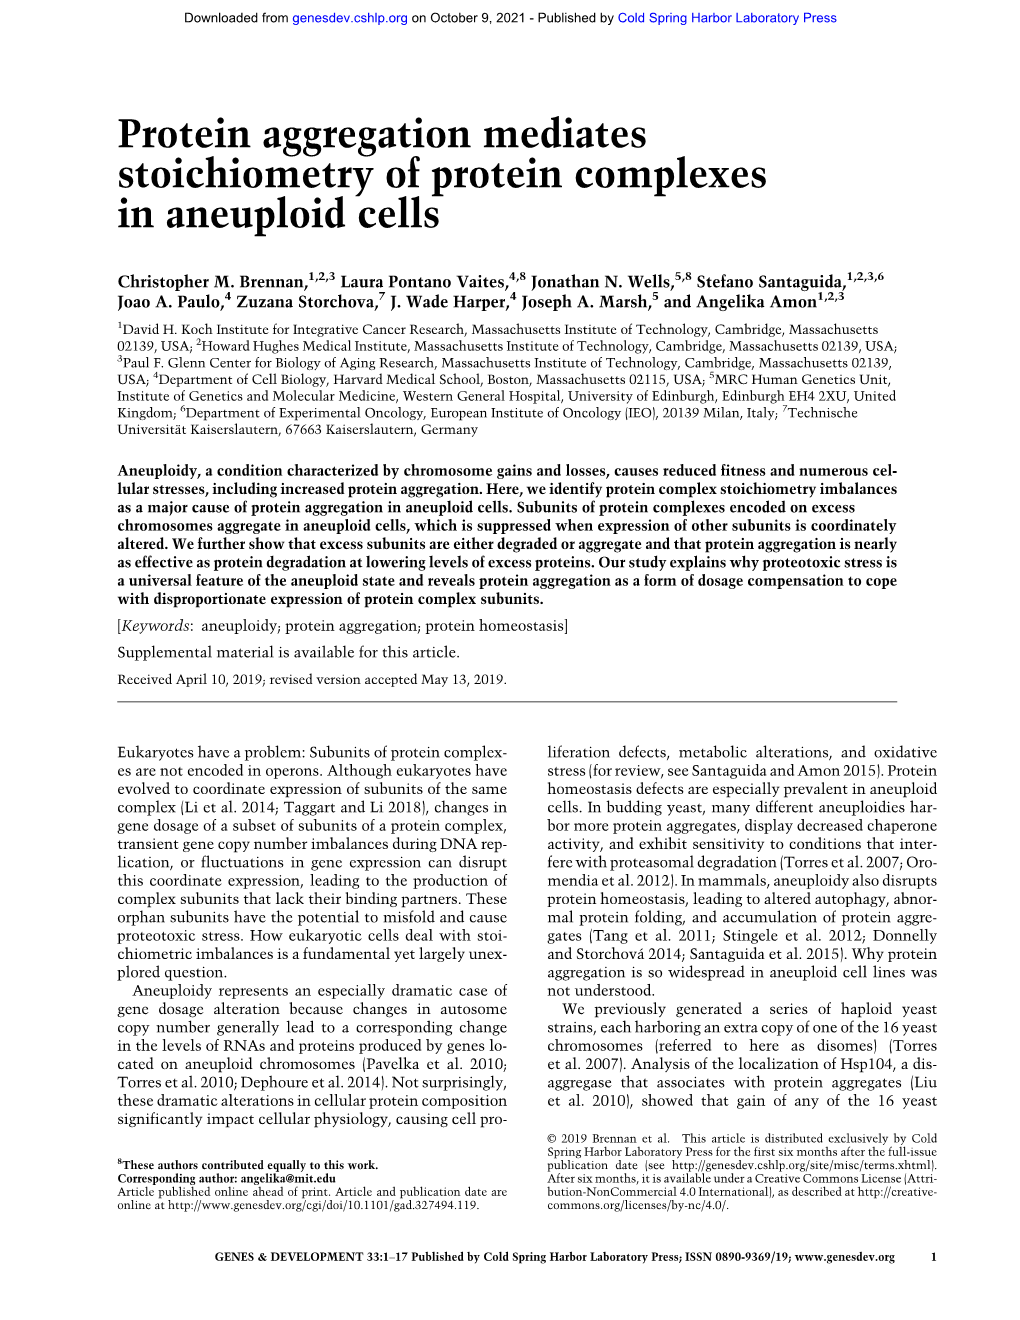 Protein Aggregation Mediates Stoichiometry of Protein Complexes in Aneuploid Cells